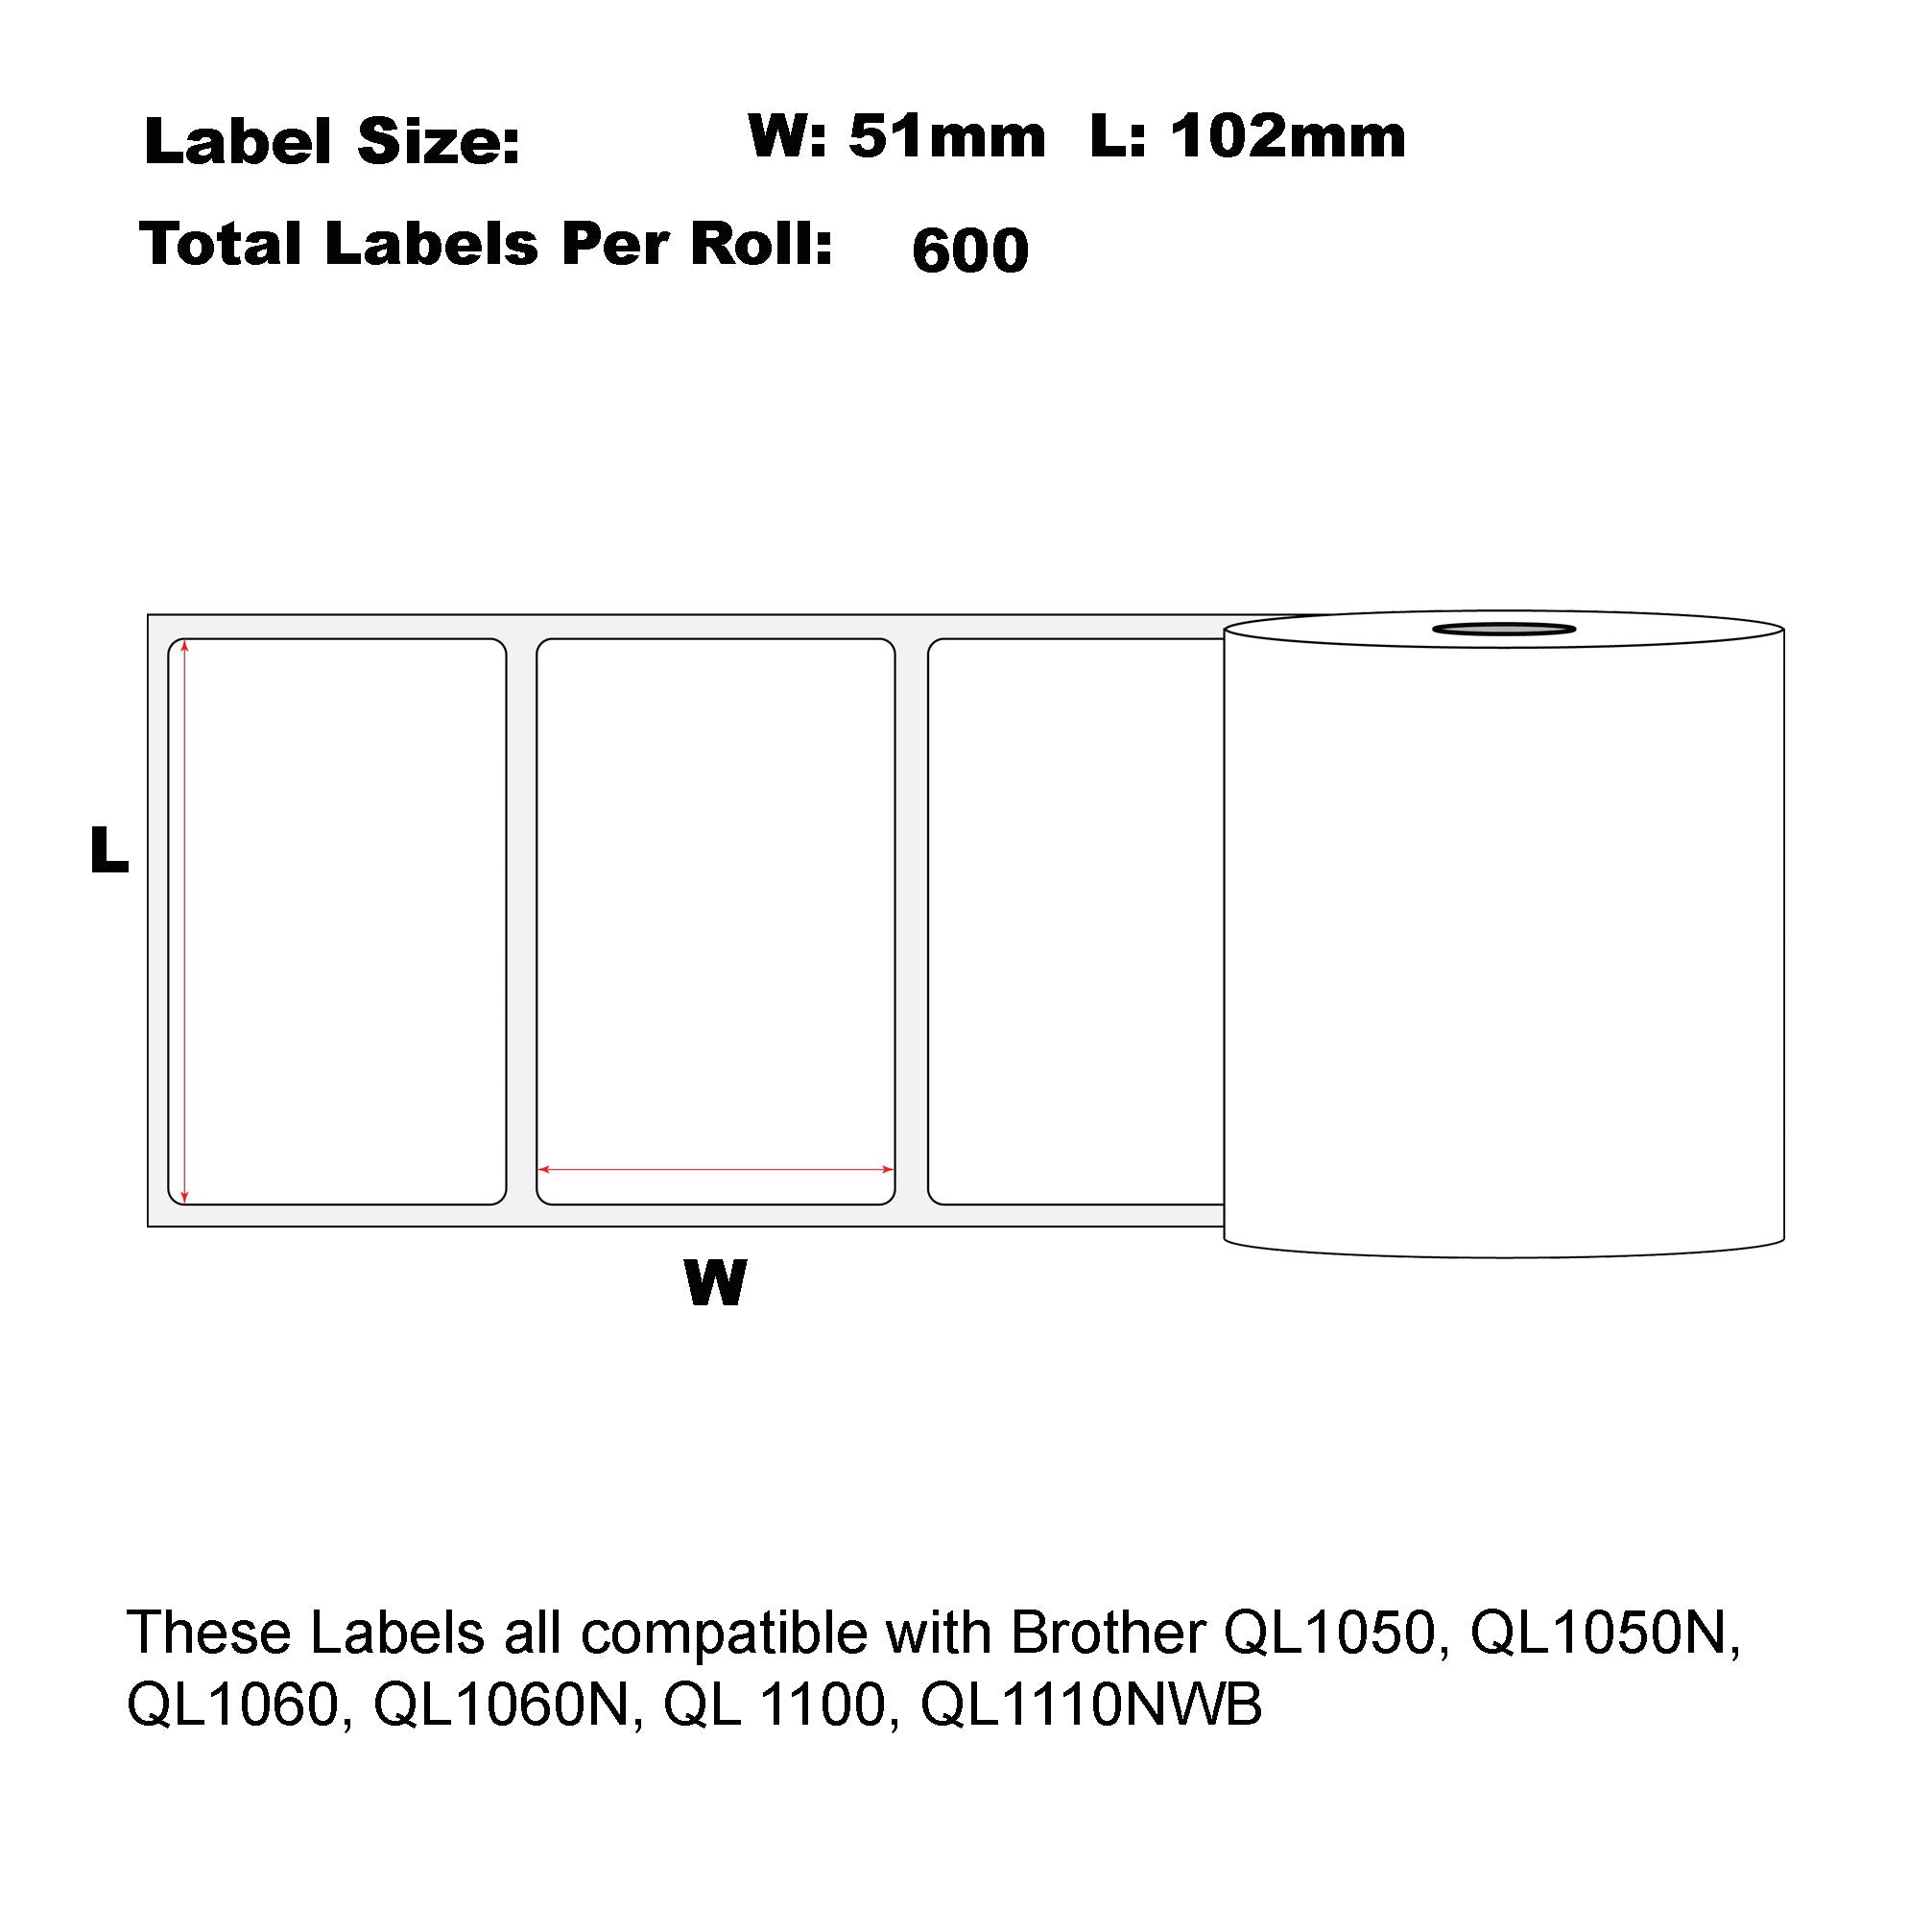 Compatible Brother DK-11240 Barcode Refill labels 102mm x 51mm-20 Rolls Bulk Buy